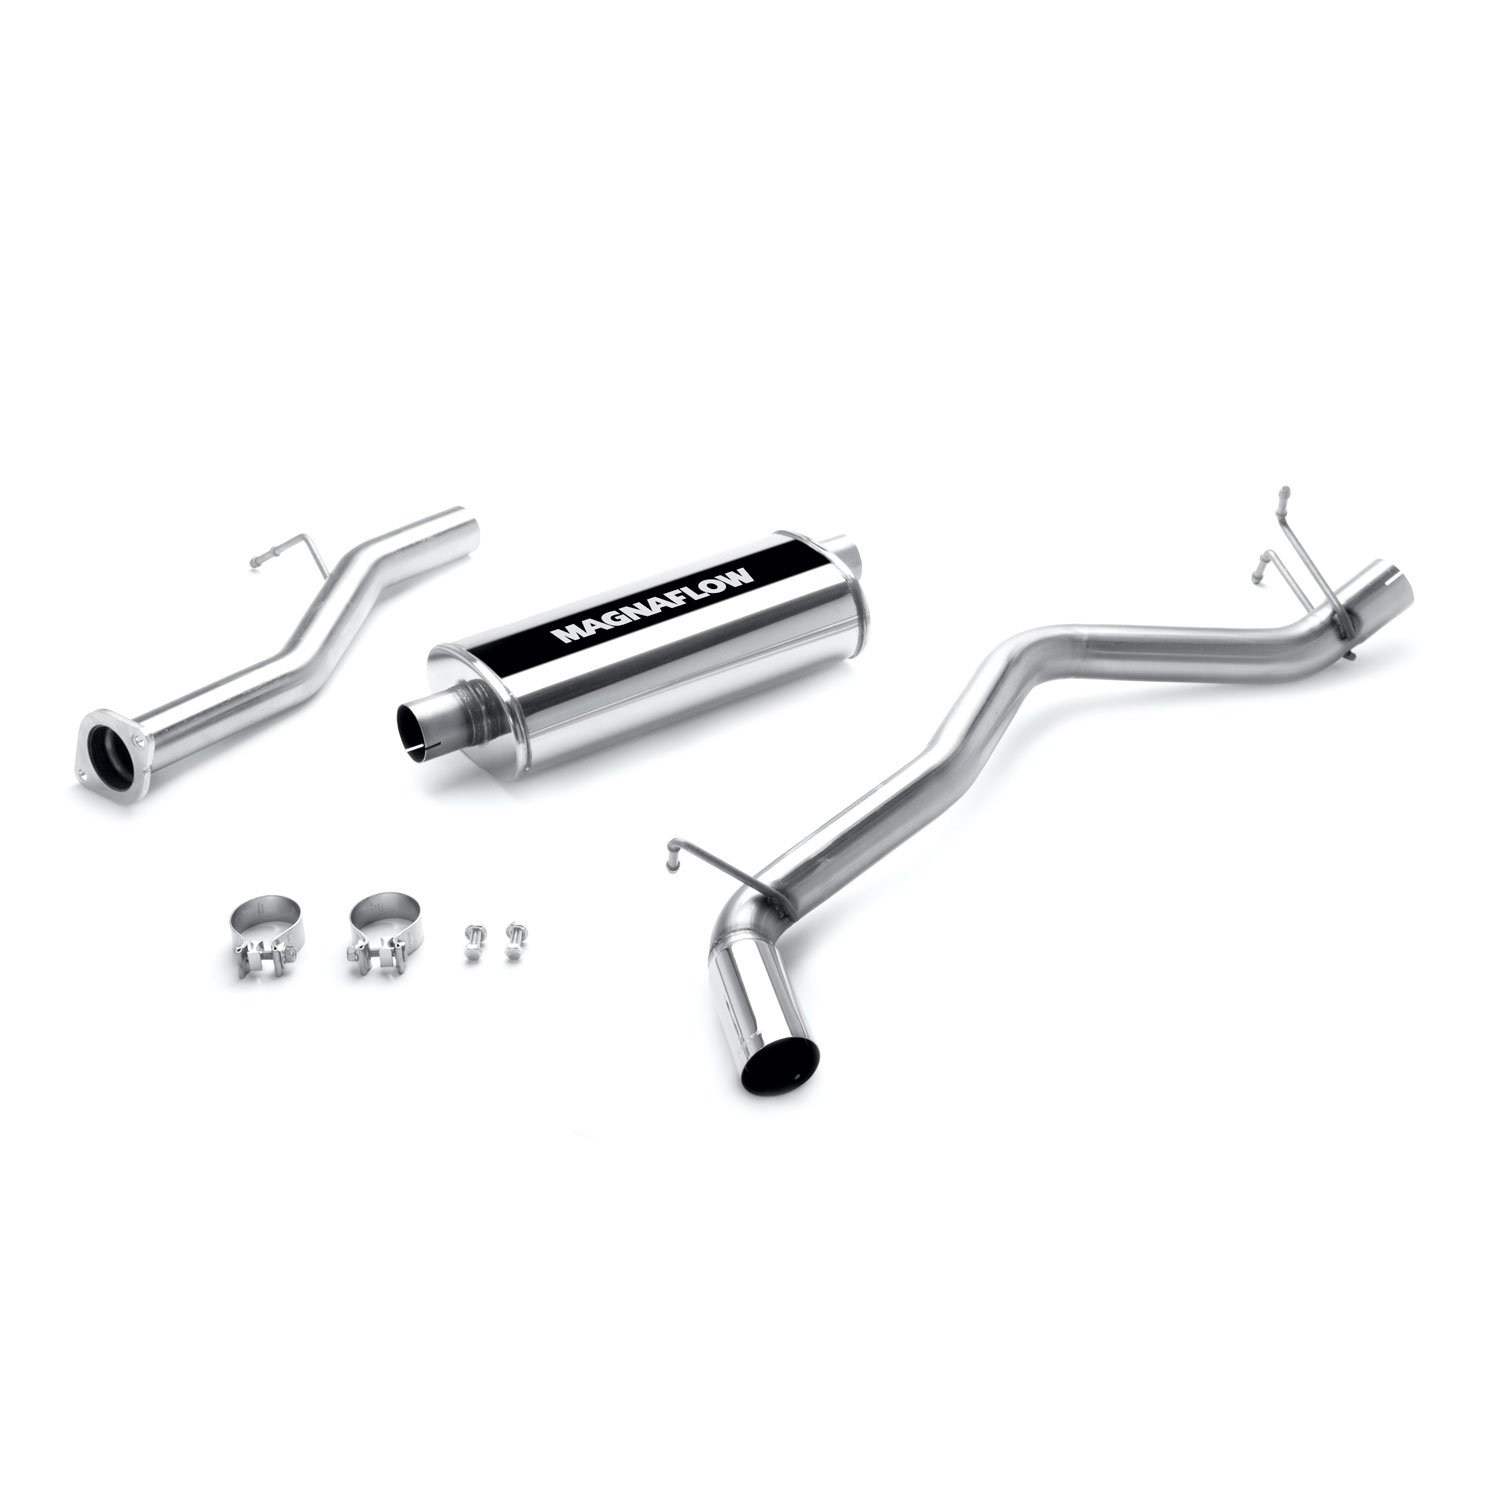 MF Series Cat-Back Exhaust System 2001-04 S10/Sonoma 4.3L (Crew Cab, 55.2" Bed)